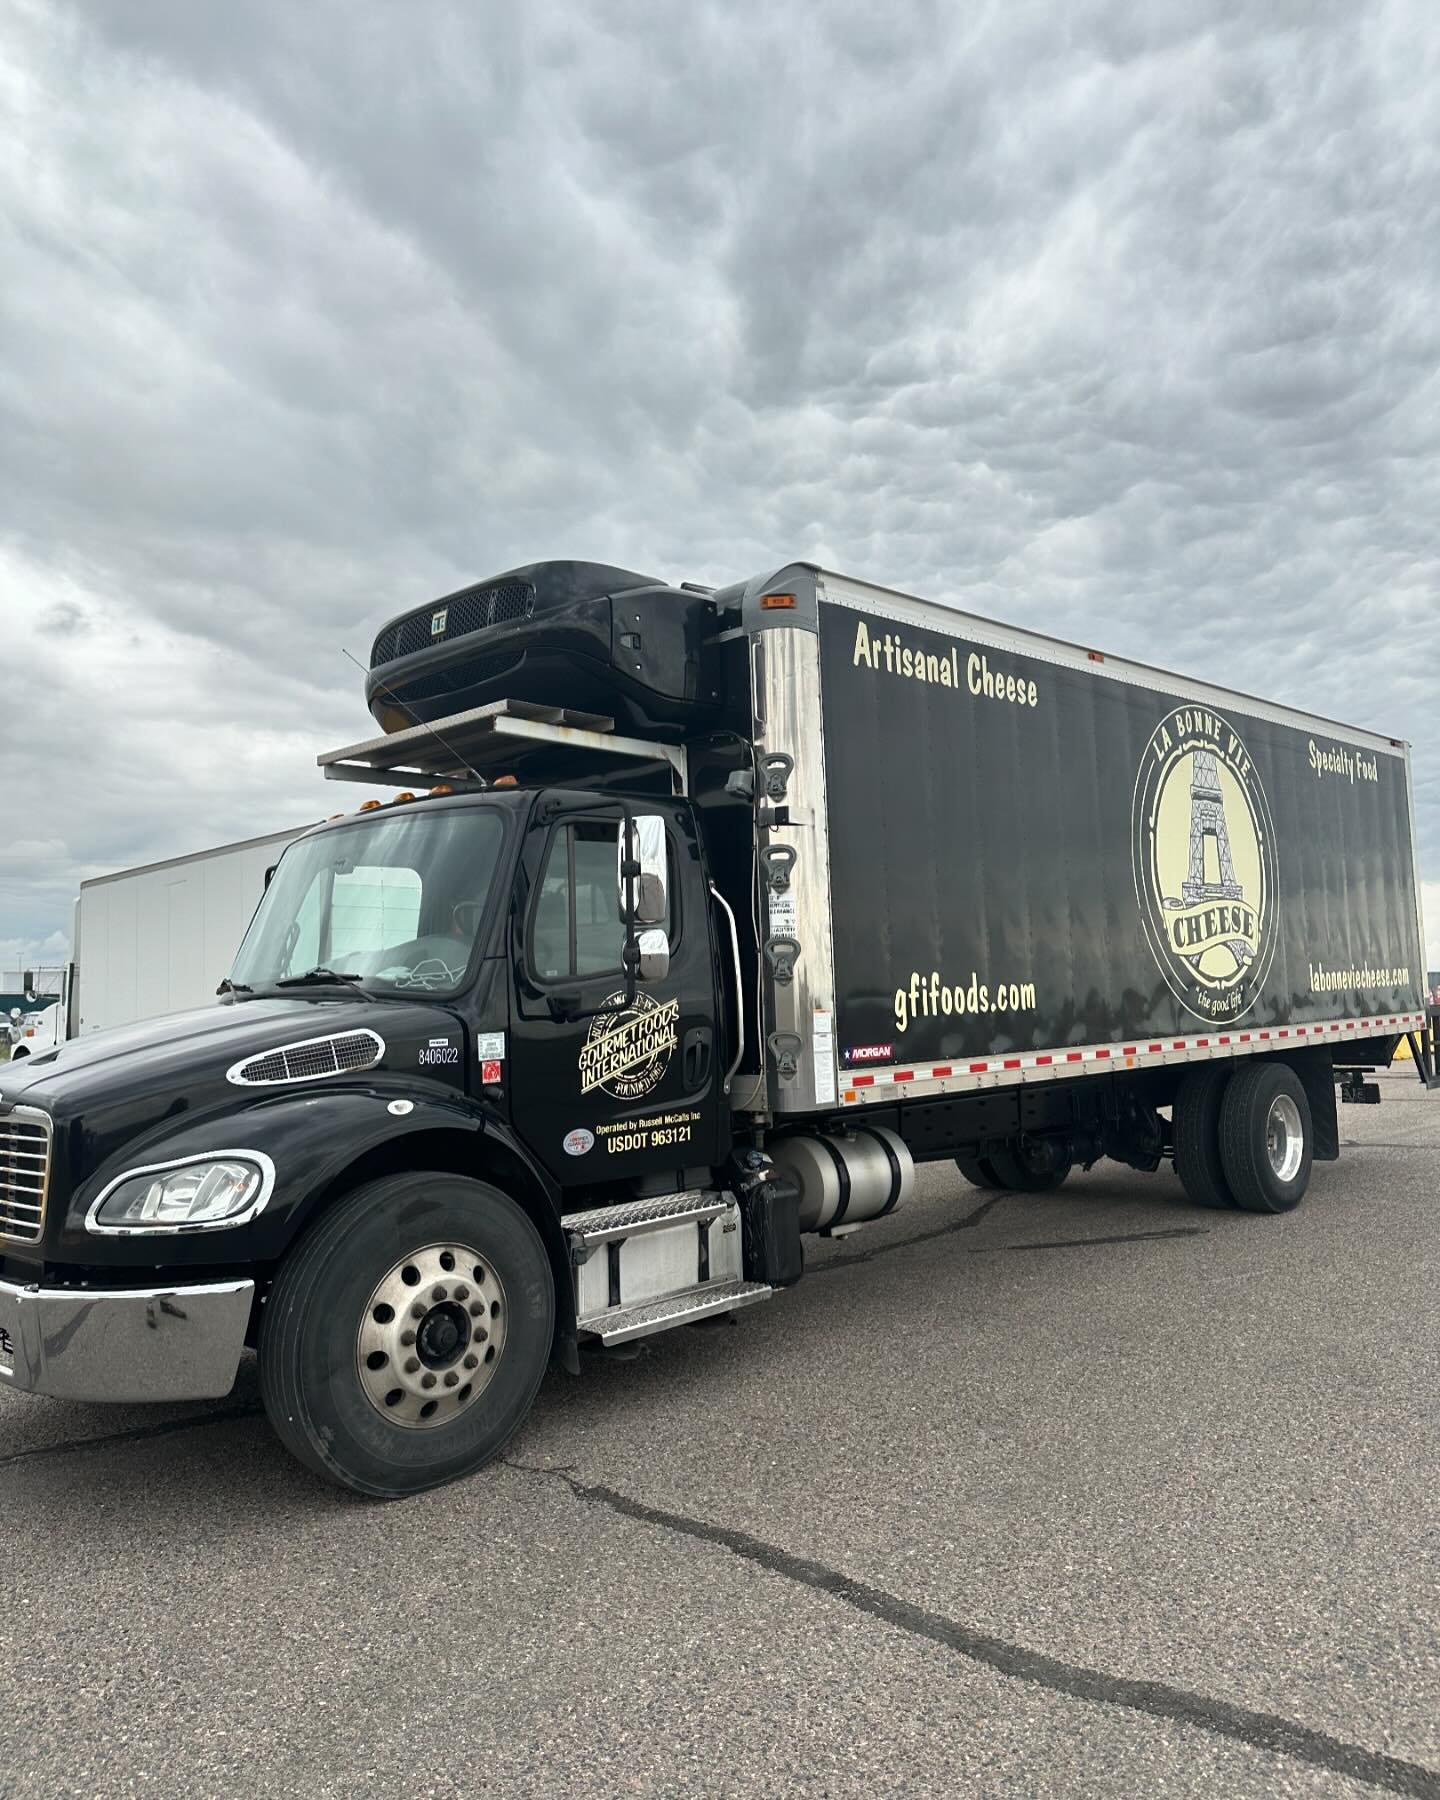 Test day for Gourmet Foods International! We must ensure safe delivery of all the cheeses! 🧀 😁 #cdl #cdltraining #cdltesting #cheese #denver #colorado #drivepointcdlacademy